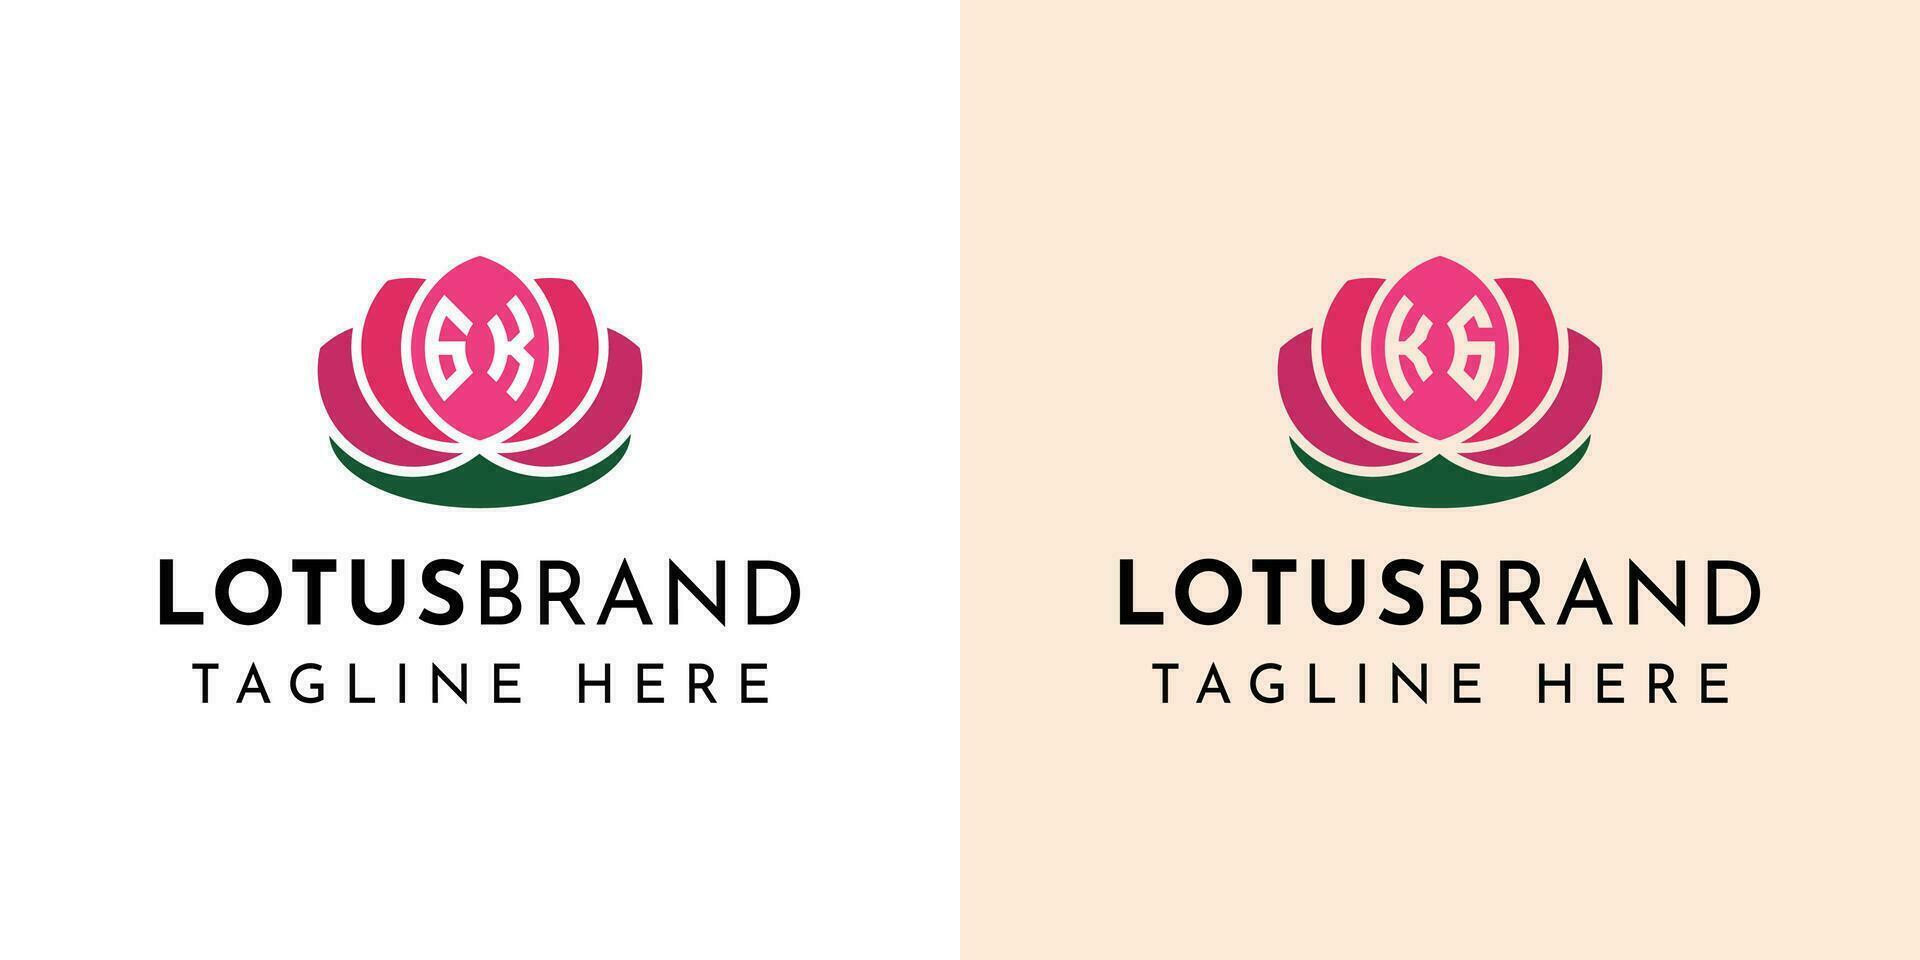 Letter GK and KG Lotus Logo Set, suitable for business related to lotus flowers with GK or KG initials. vector